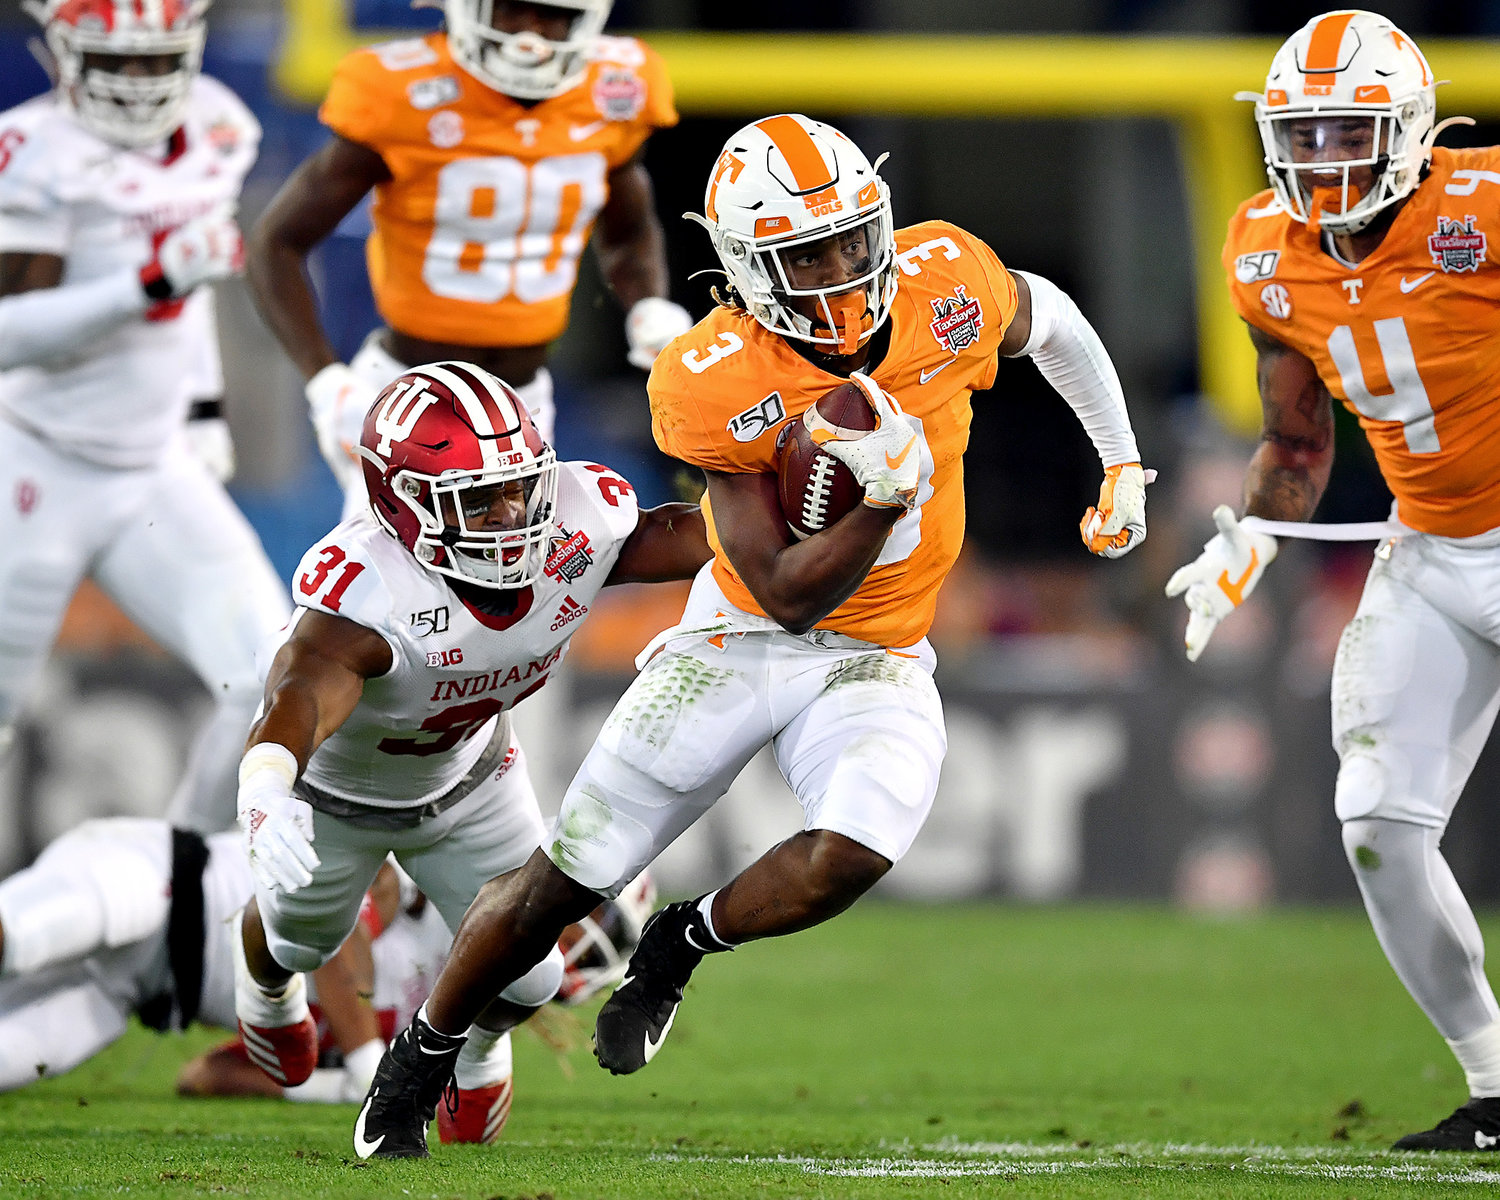 Tennessee Volunteers running back Eric Gray (3) finds a gap on the way to a first down in the first half of the Gator Bowl NCAA football game against the Indiana Hoosiers Thursday, January 2, 2020, at TIAA Bank Field in Jacksonville, Fla.